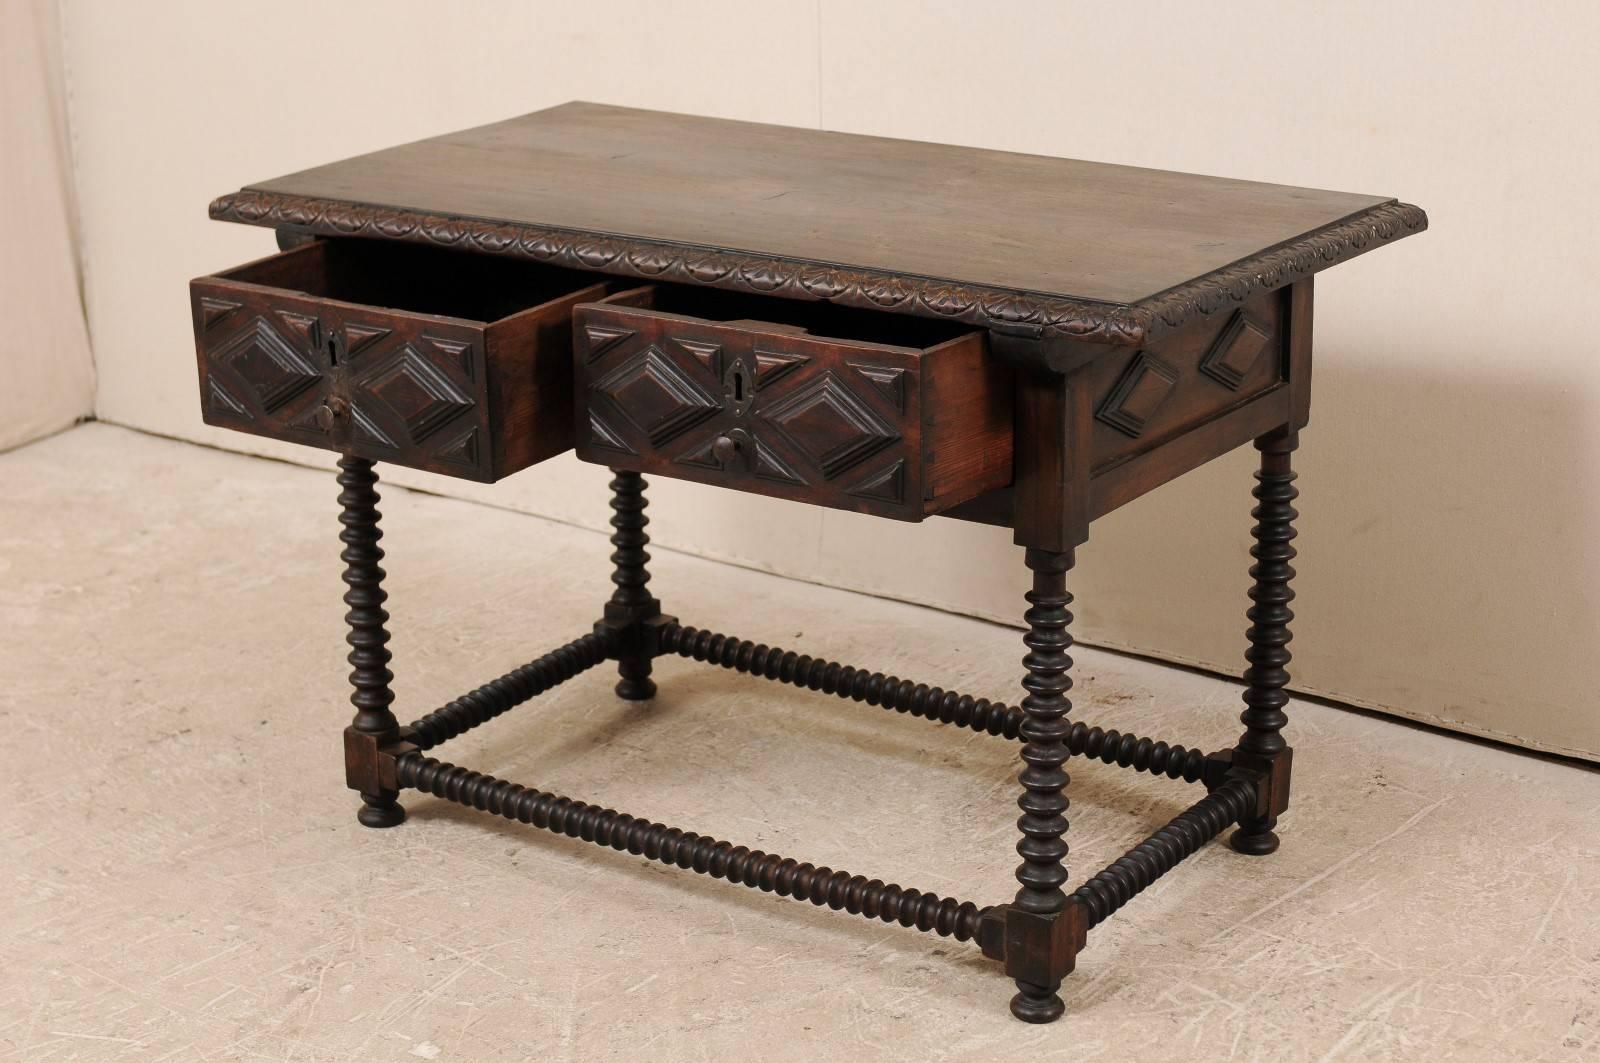 Carved Spanish Early 18th Century Walnut Wood Desk with Spindled Legs and Box Stretcher